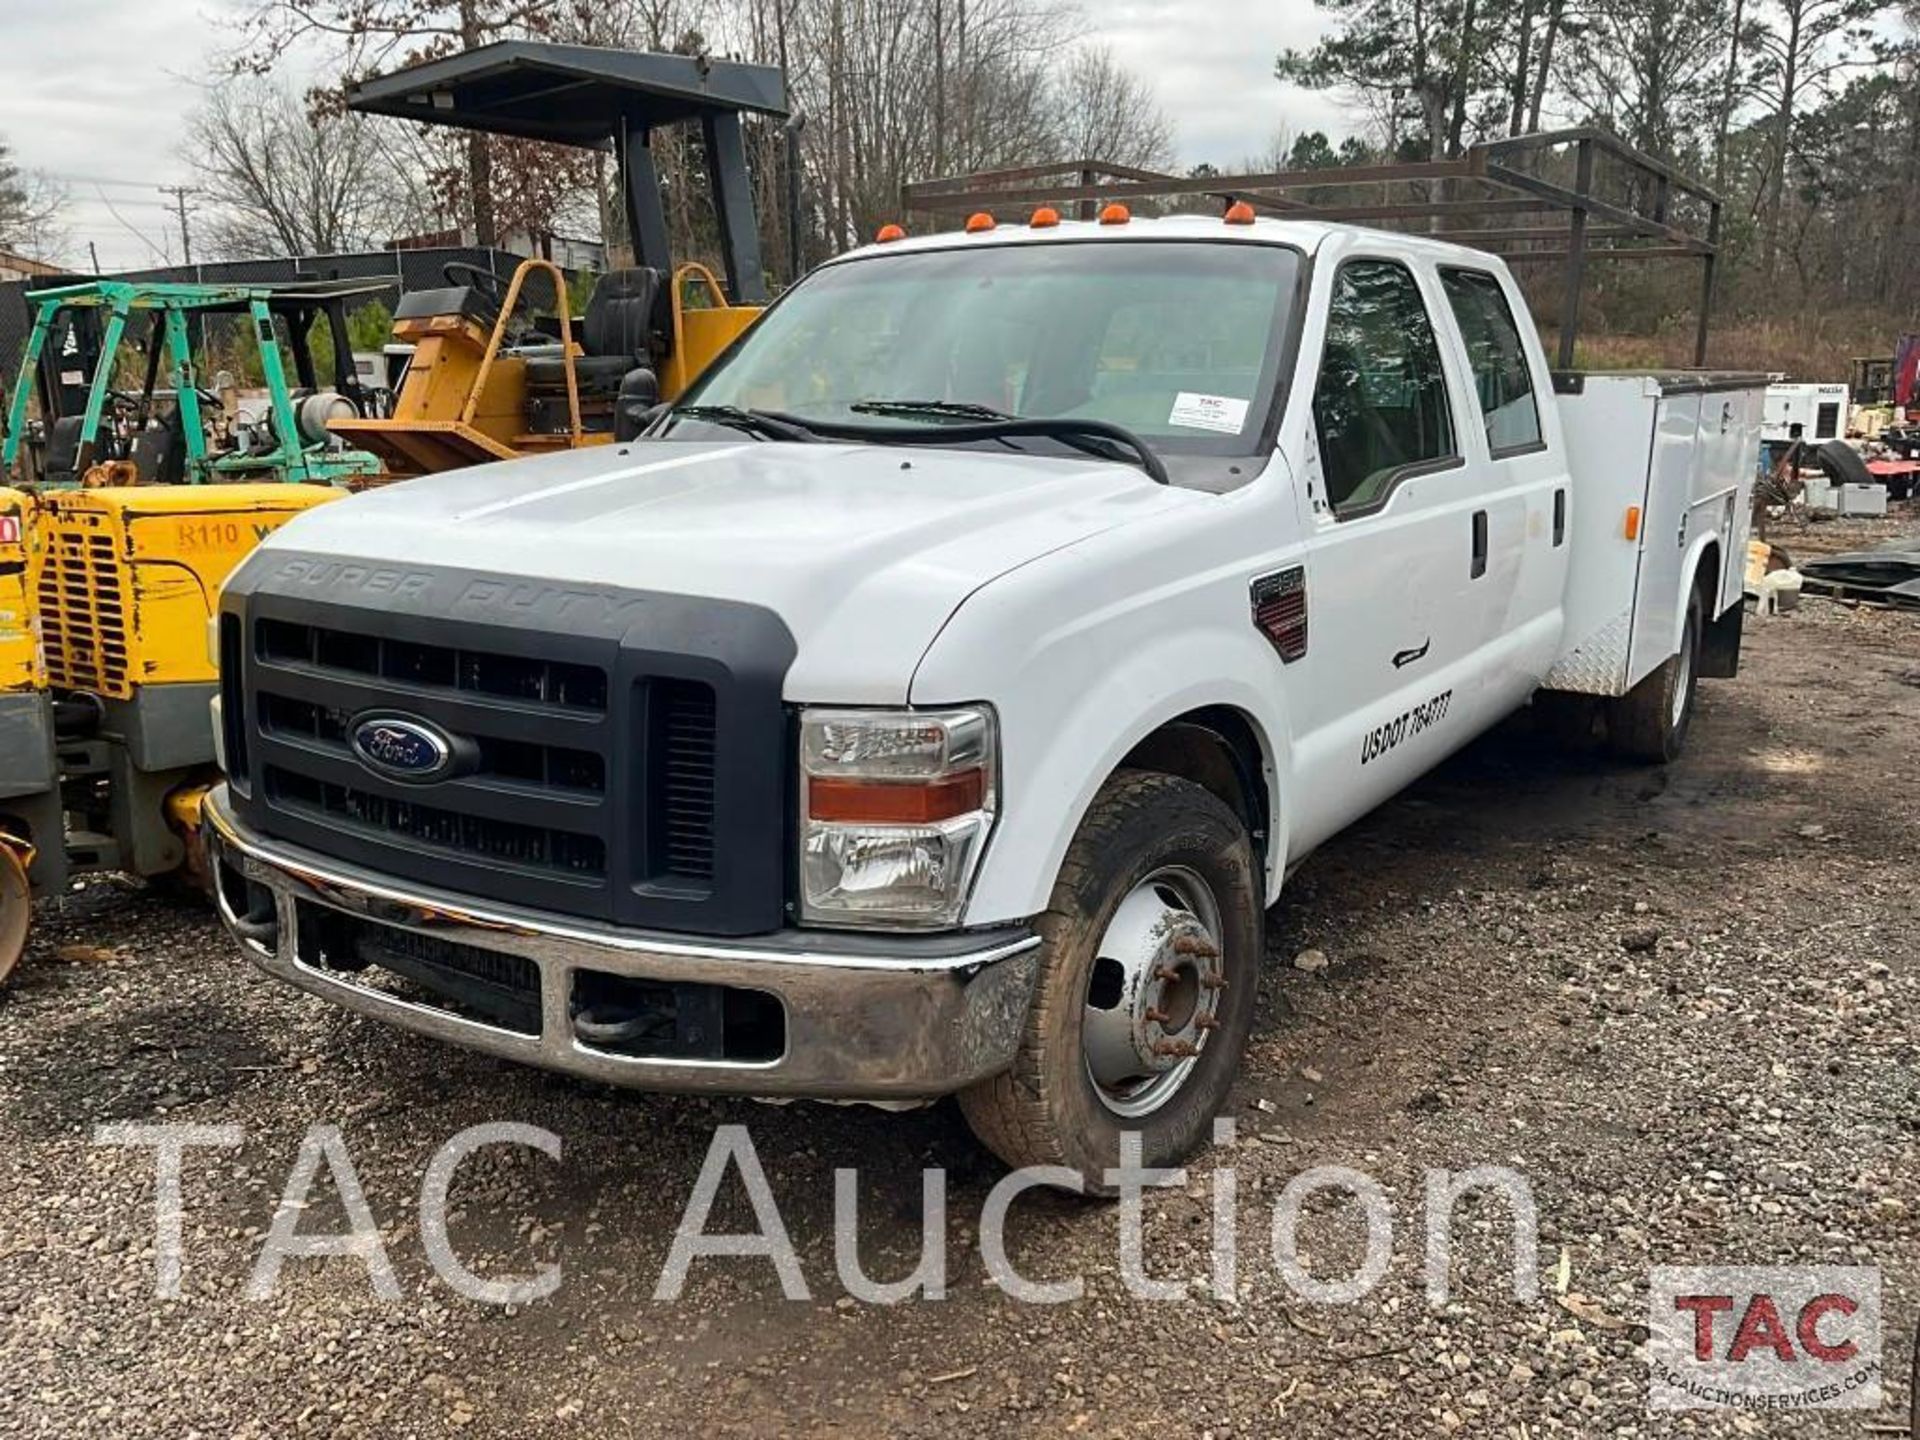 2008 Ford F-350 Super Duty Service Truck - Image 2 of 124